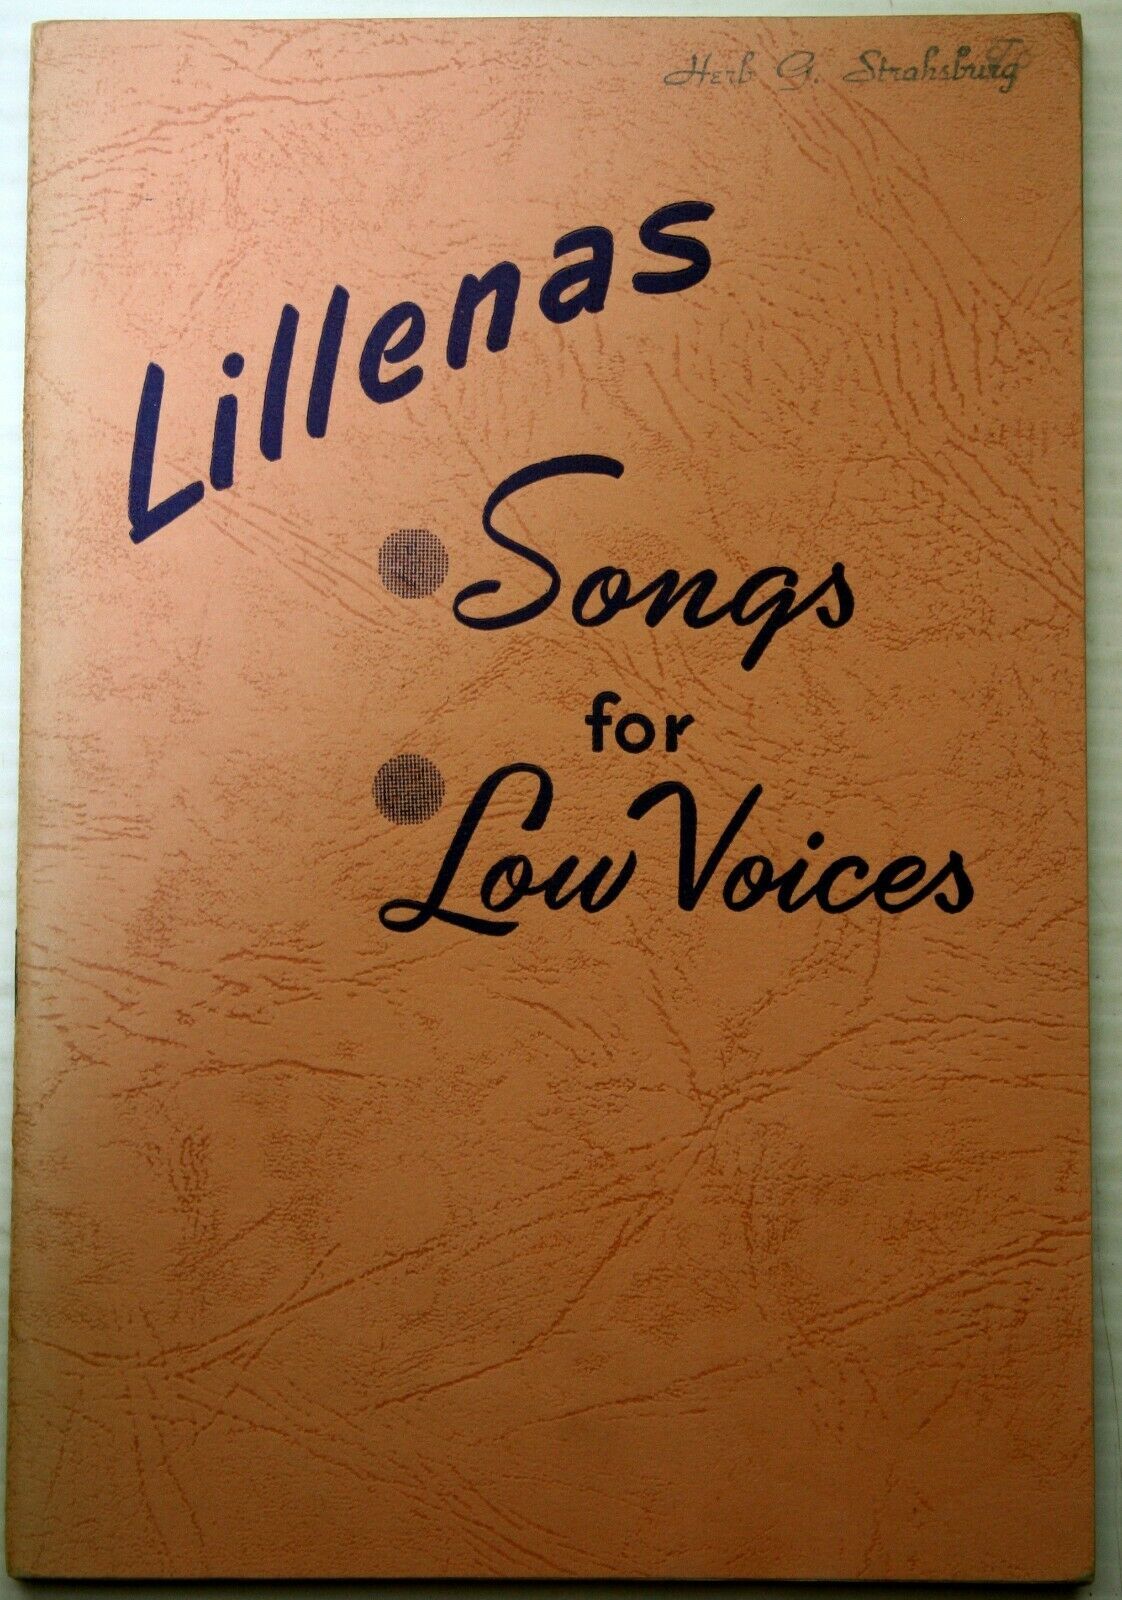 Haldor LILLENAS' SONGS FOR LOW VOICES 1927 mixed voice/chorus Evangel Holiness